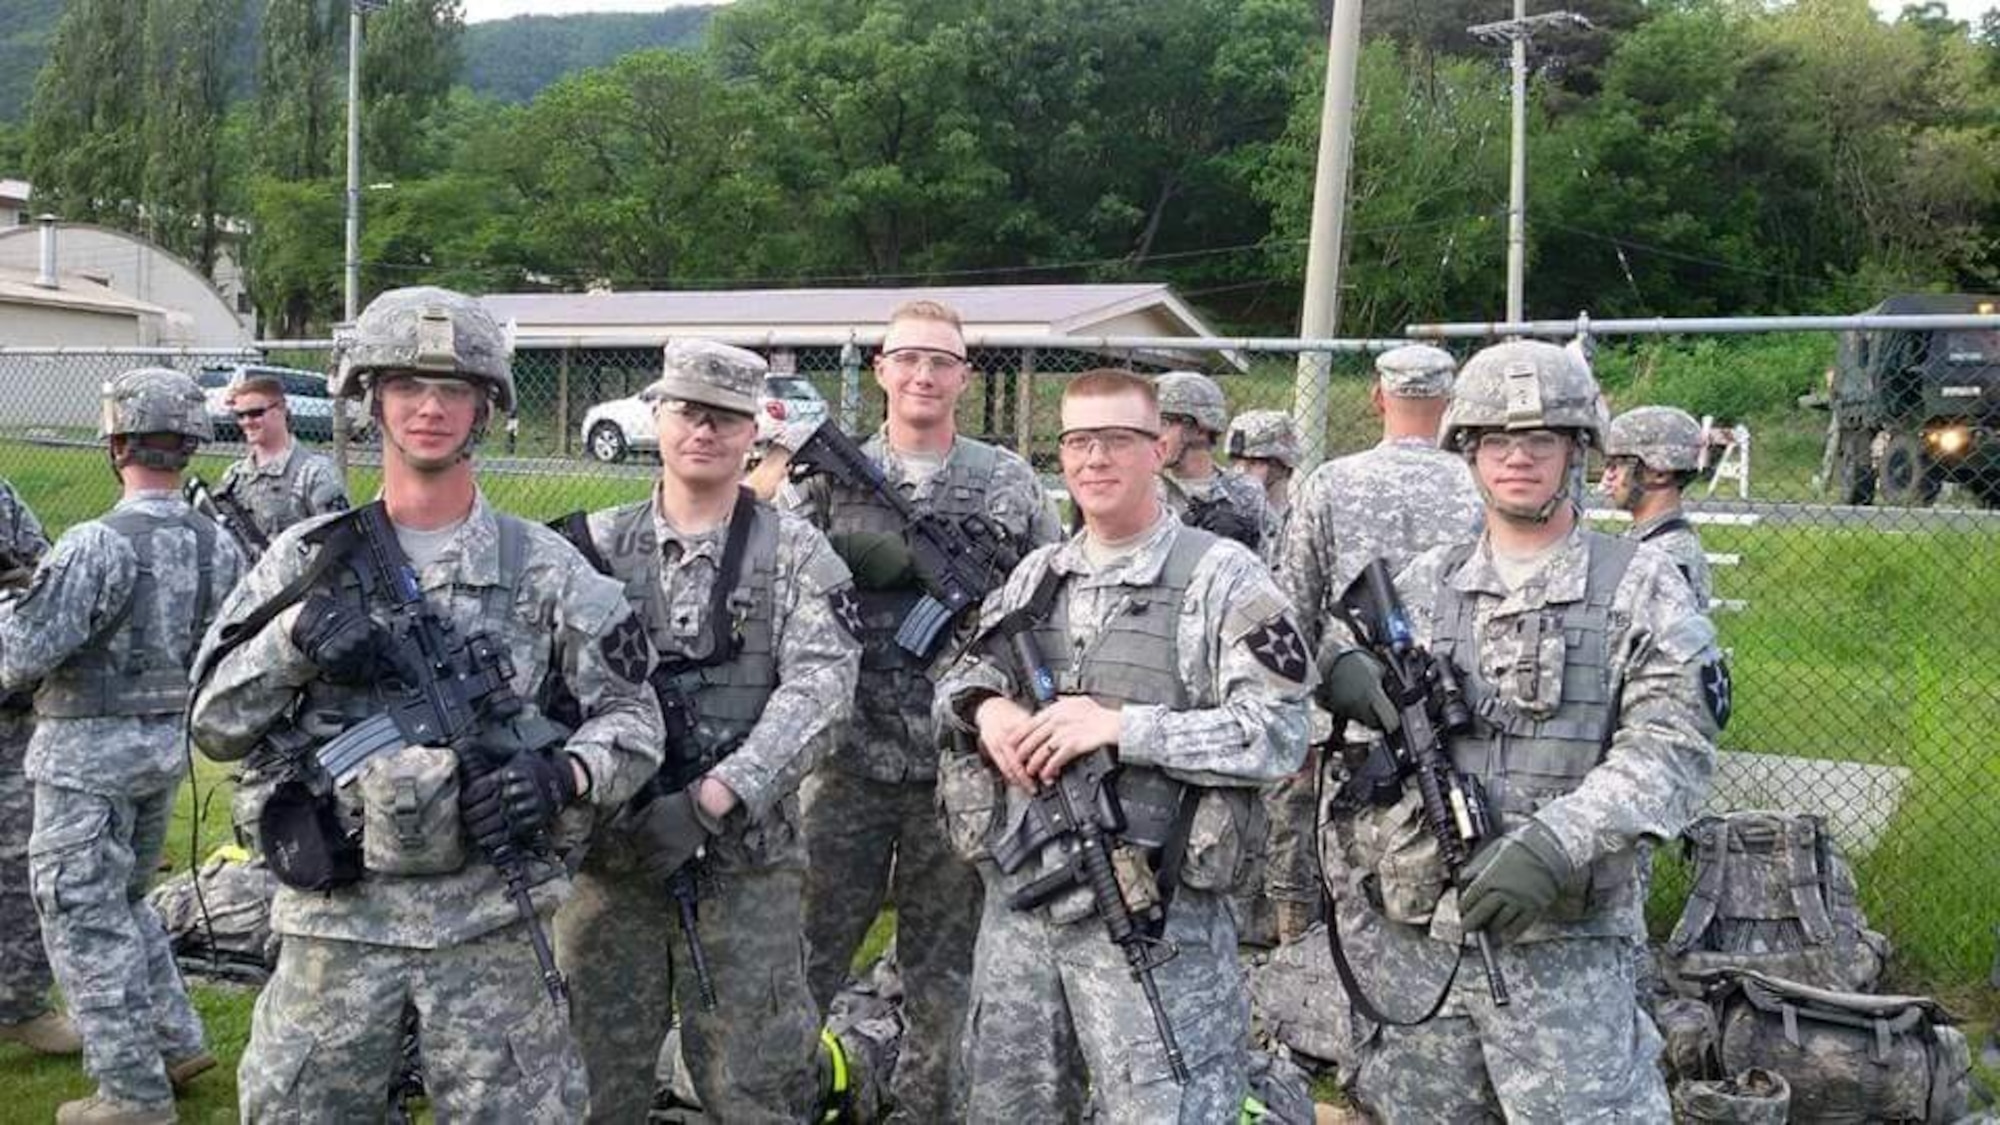 U.S. Army Spc. Nathaniel McCready, far right, poses after completing the Manchu Mile while stationed at Camp Casey, South Korea, July 19, 2017. Now a flight chief for Space Delta 2 – Space Domain Awareness and Space Battle Management’s 18th Space Defense Squadron, McCready credits his former station commander for encouraging him to follow his passion and pursue a career in the Space Force. (Courtesy photo provided by Tech Sgt. Nathaniel McCready)